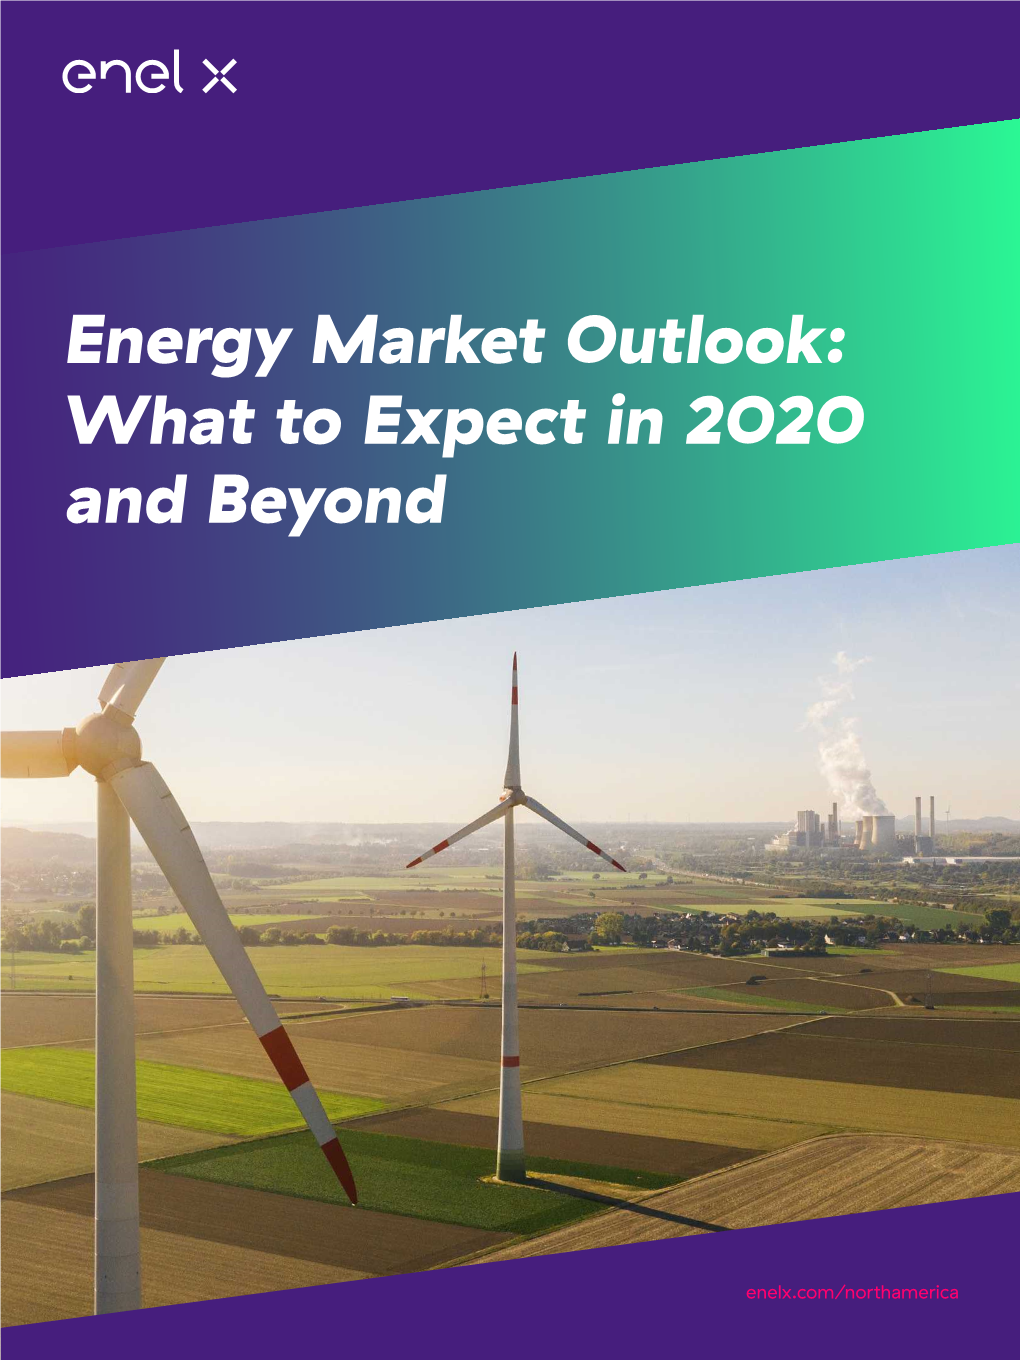 Energy Market Outlook: What to Expect in 2020 and Beyond